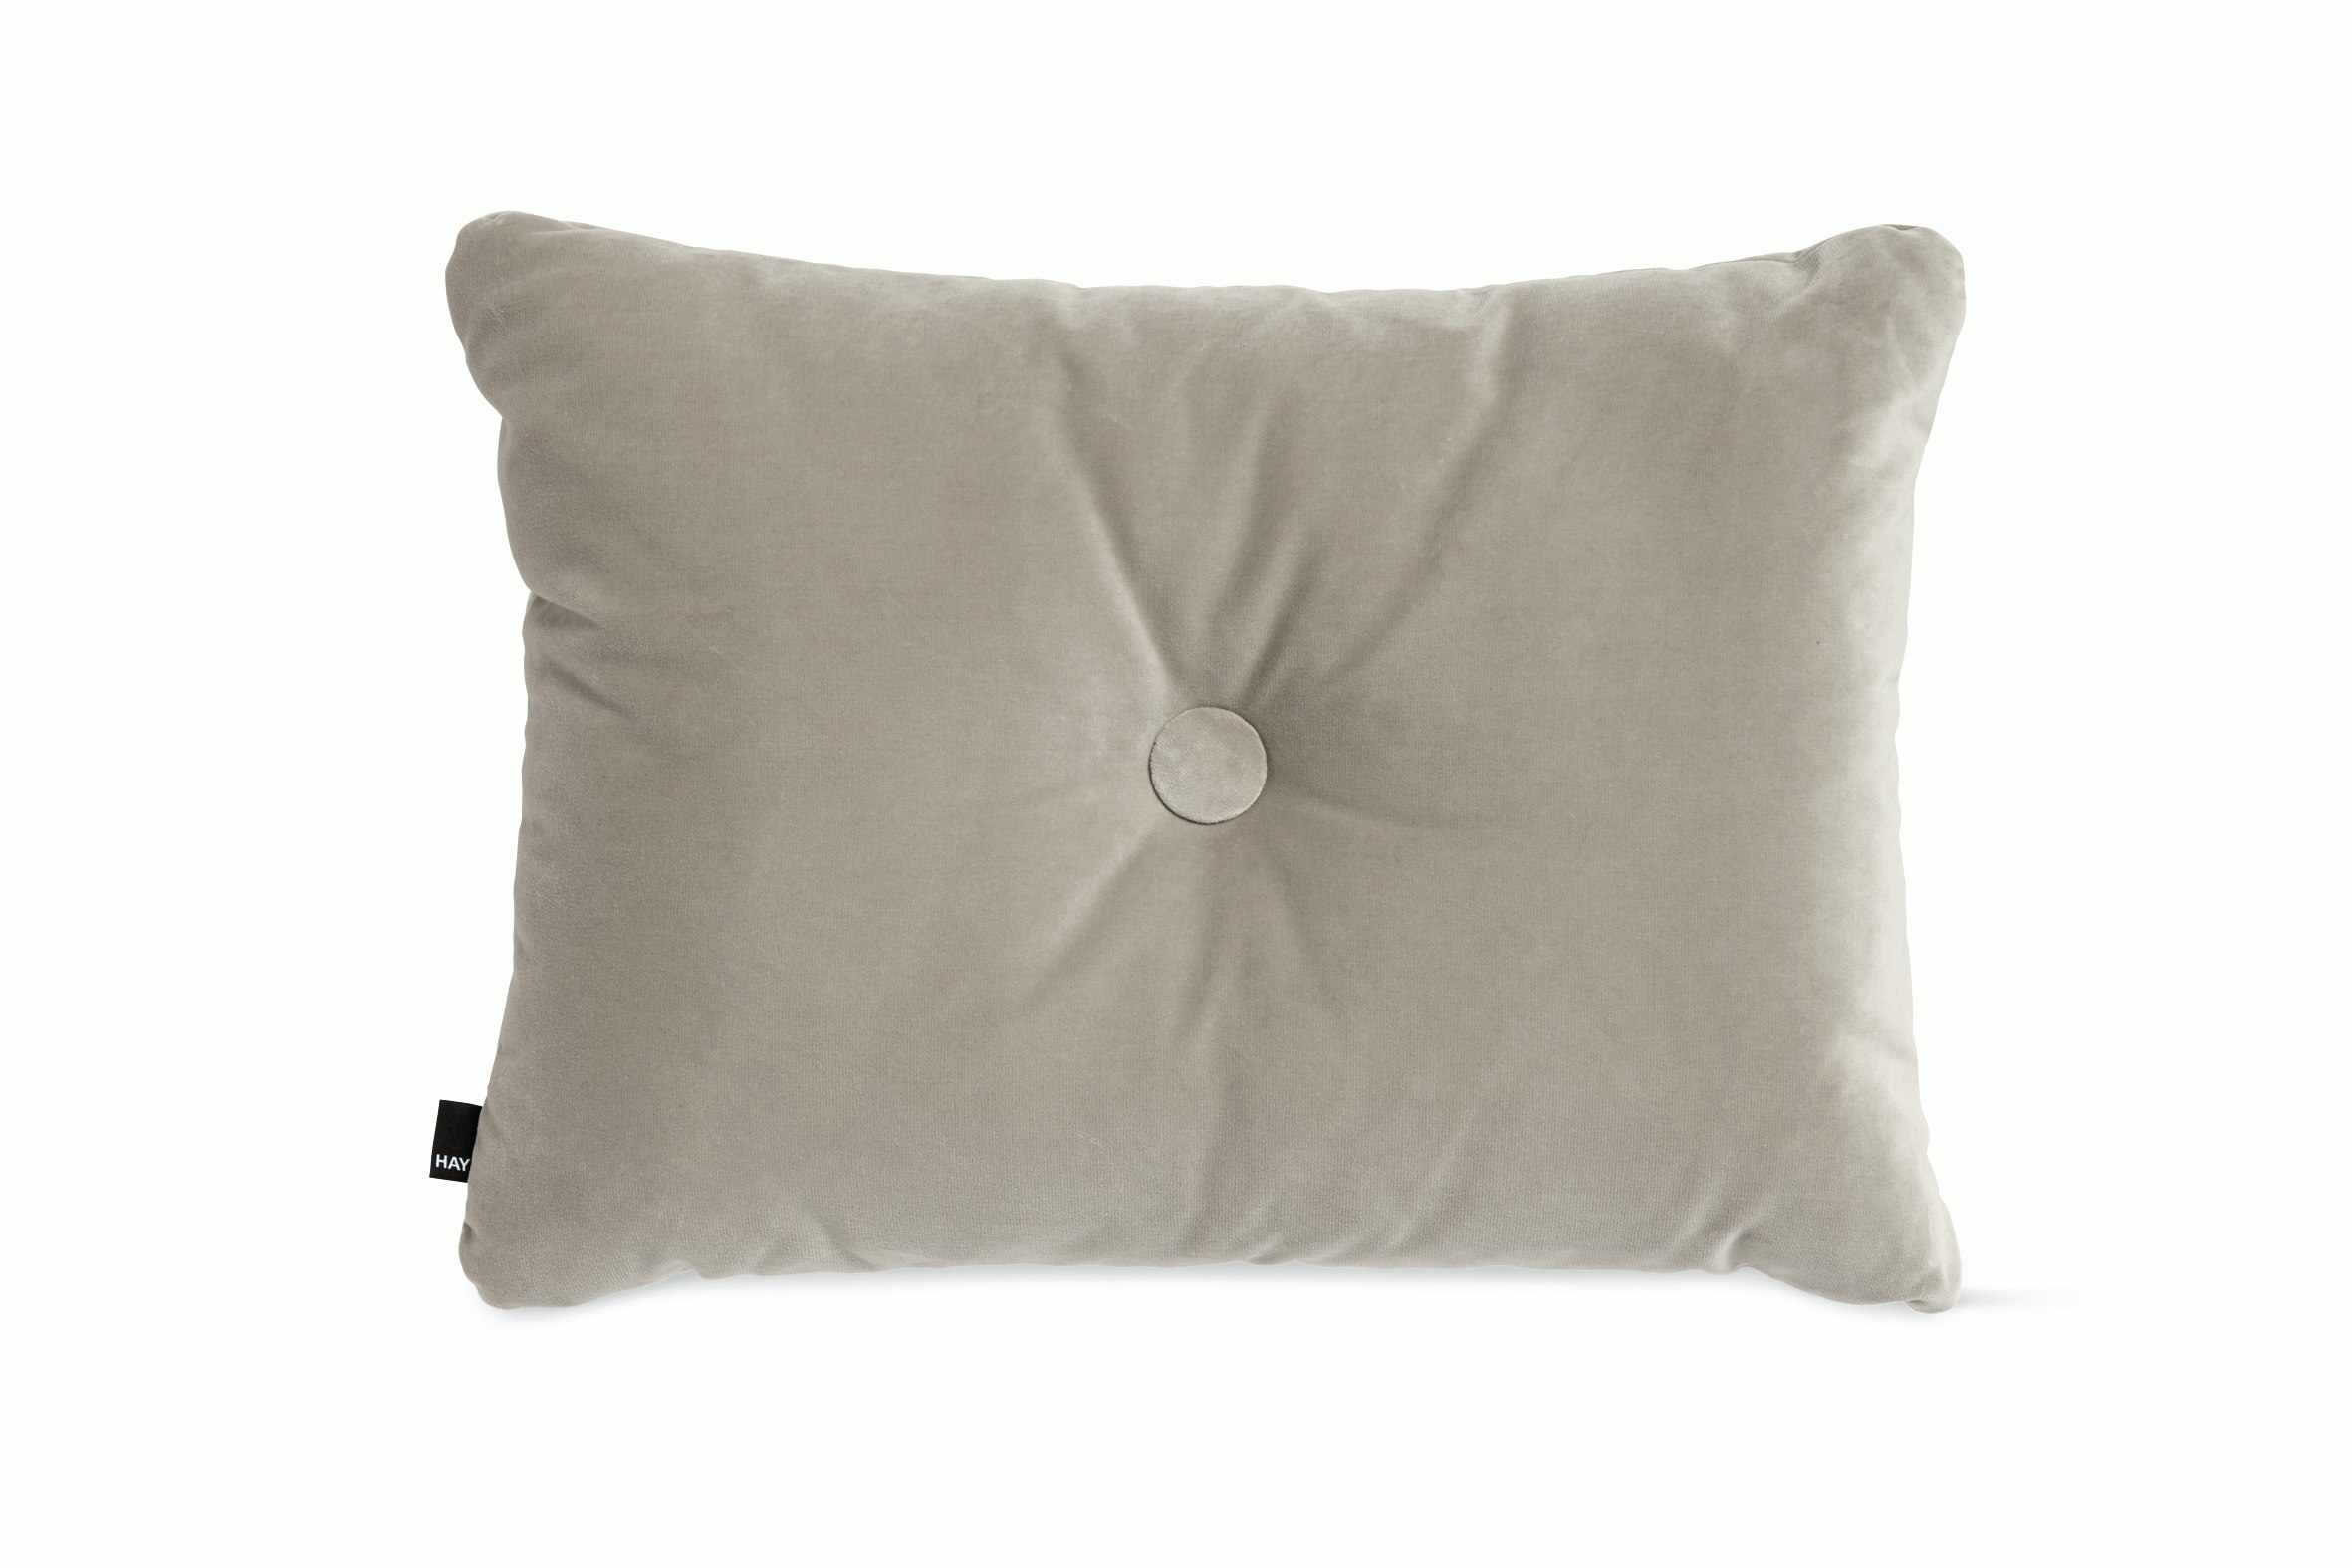 Authentic HAY Dot Pillow in Steelcut Trio FabricDesign Within Reach 